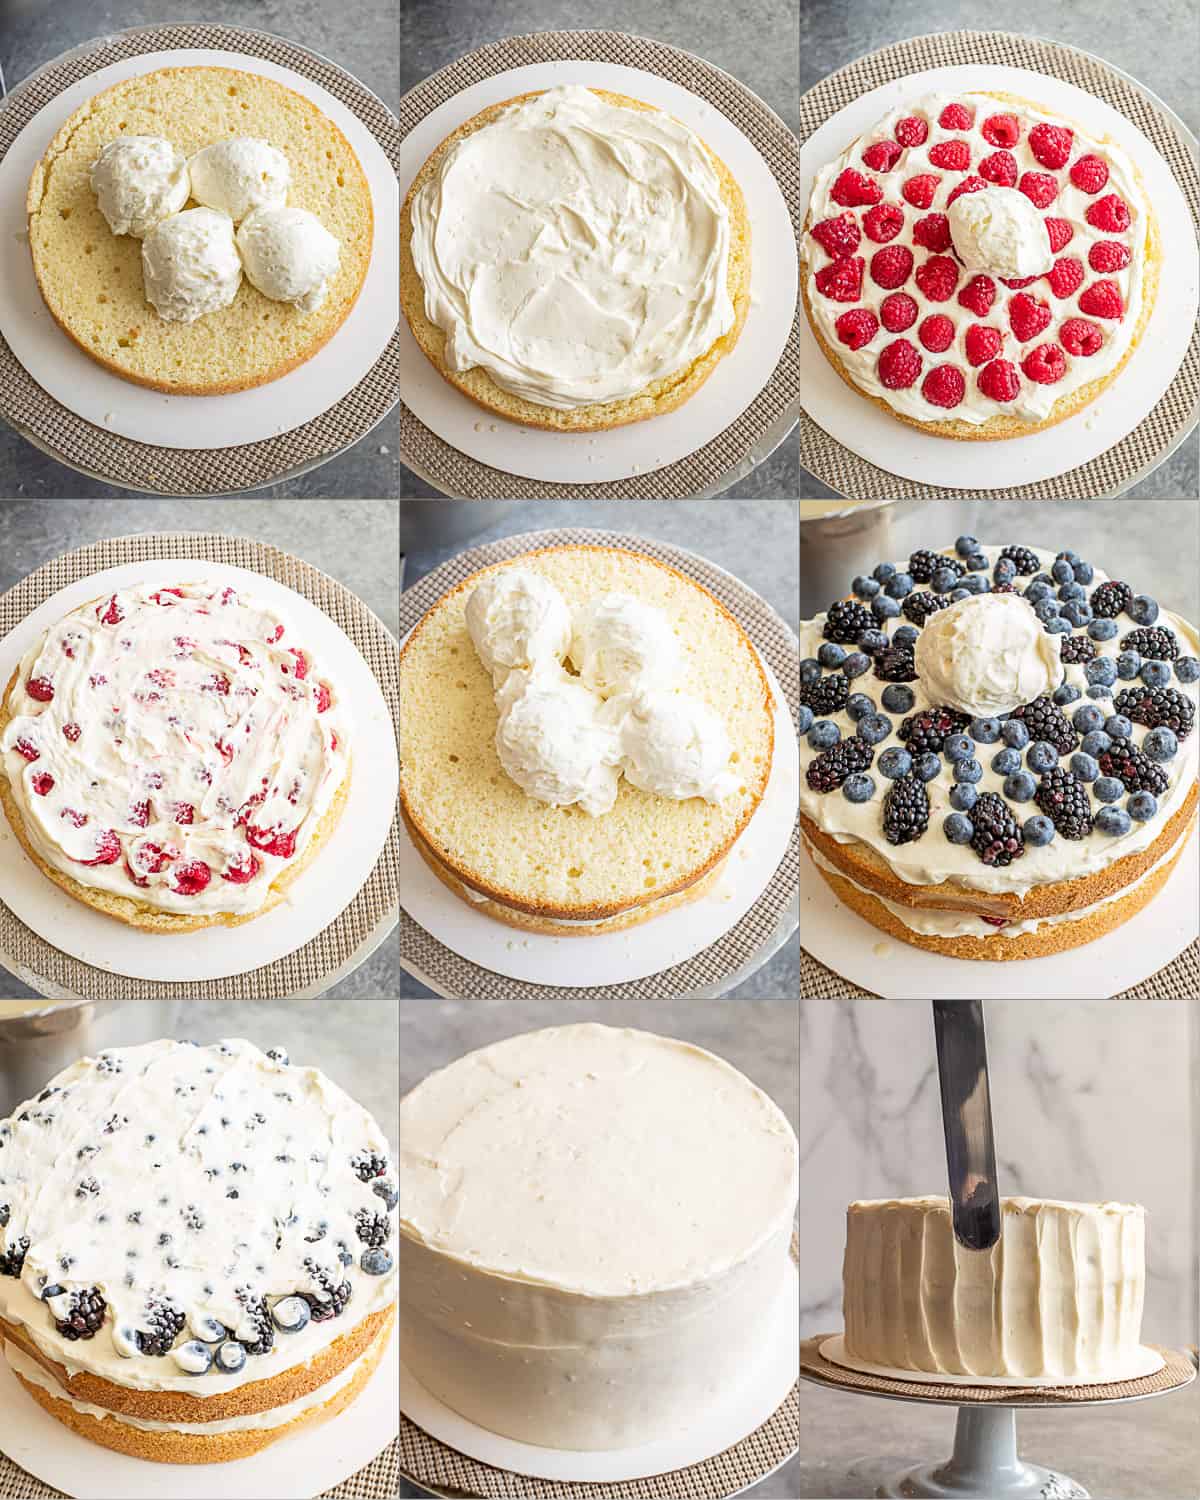 Step by step process of layering the cake with cream and berries.